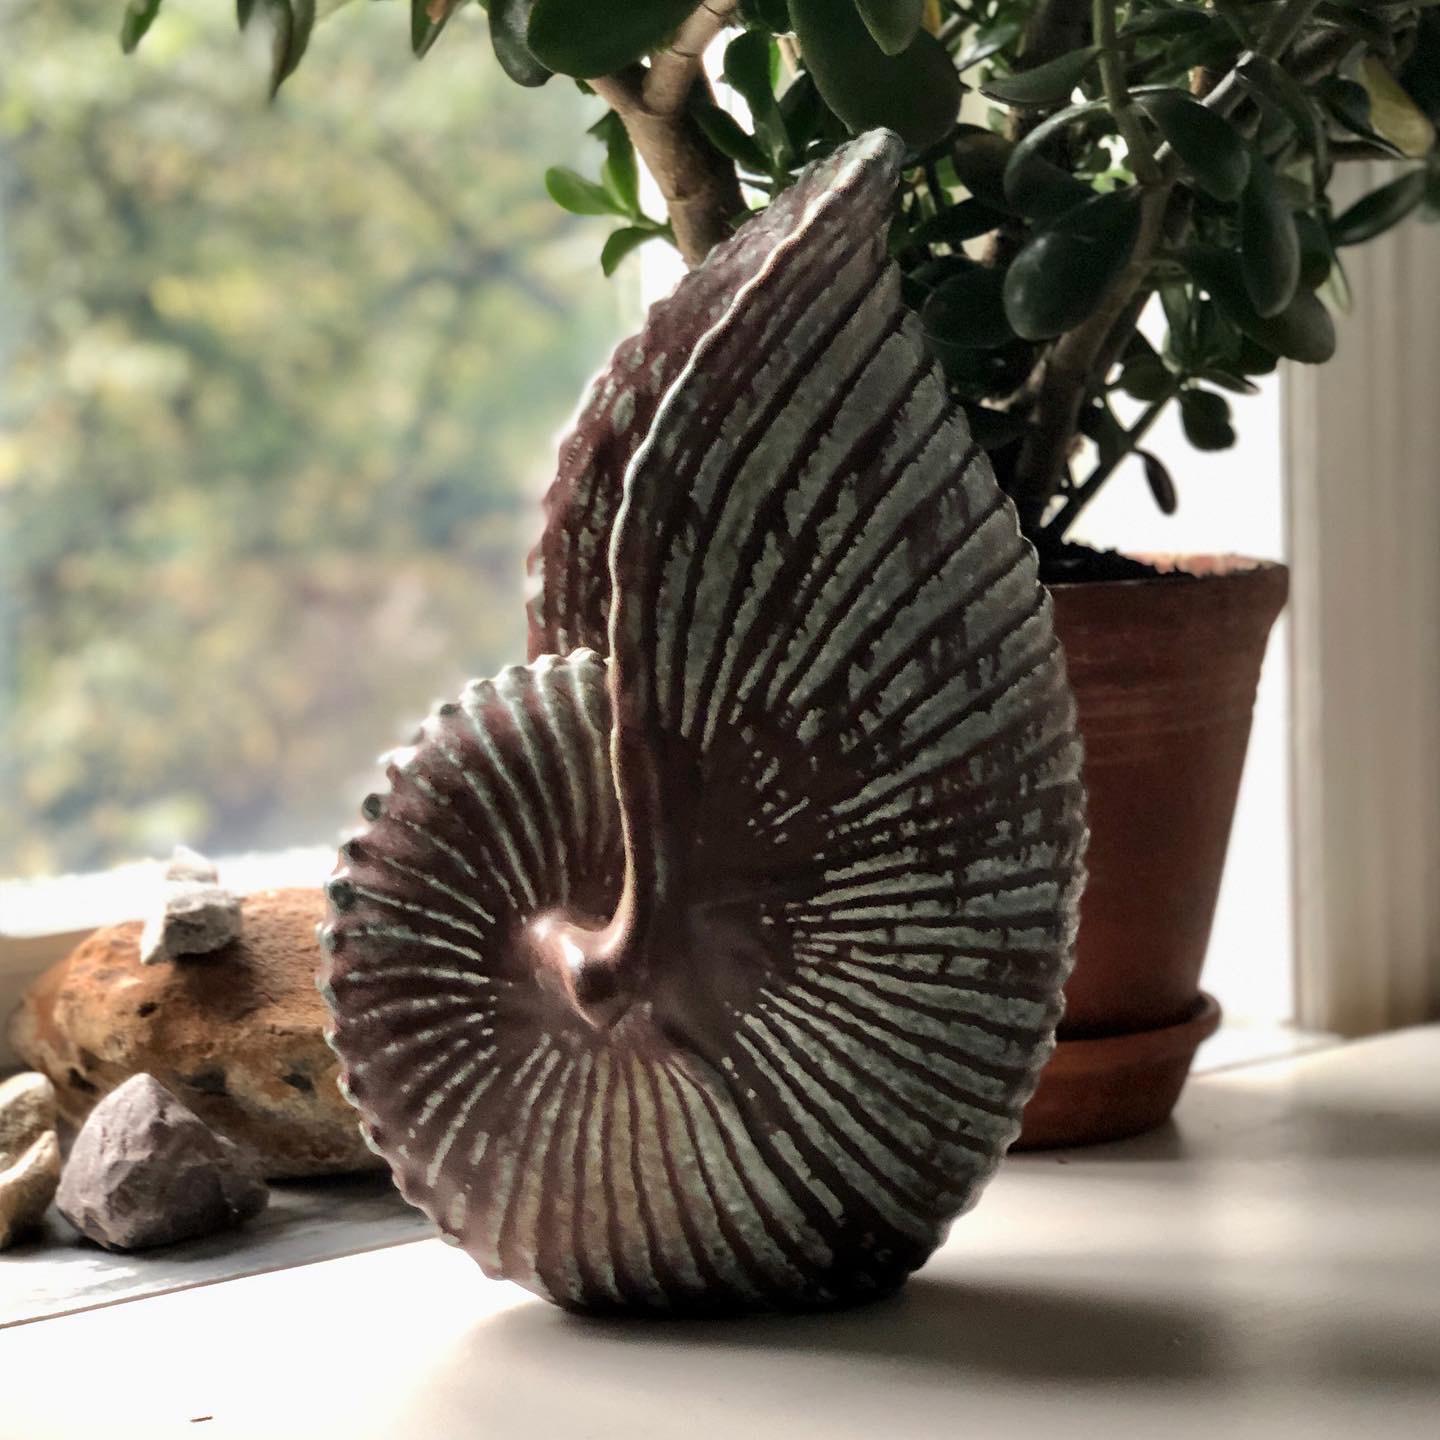 Mid-20th Century Scandinavian Modern Shell Sculpture by Gunnar Nylund  for Rörstrand, 1930s For Sale